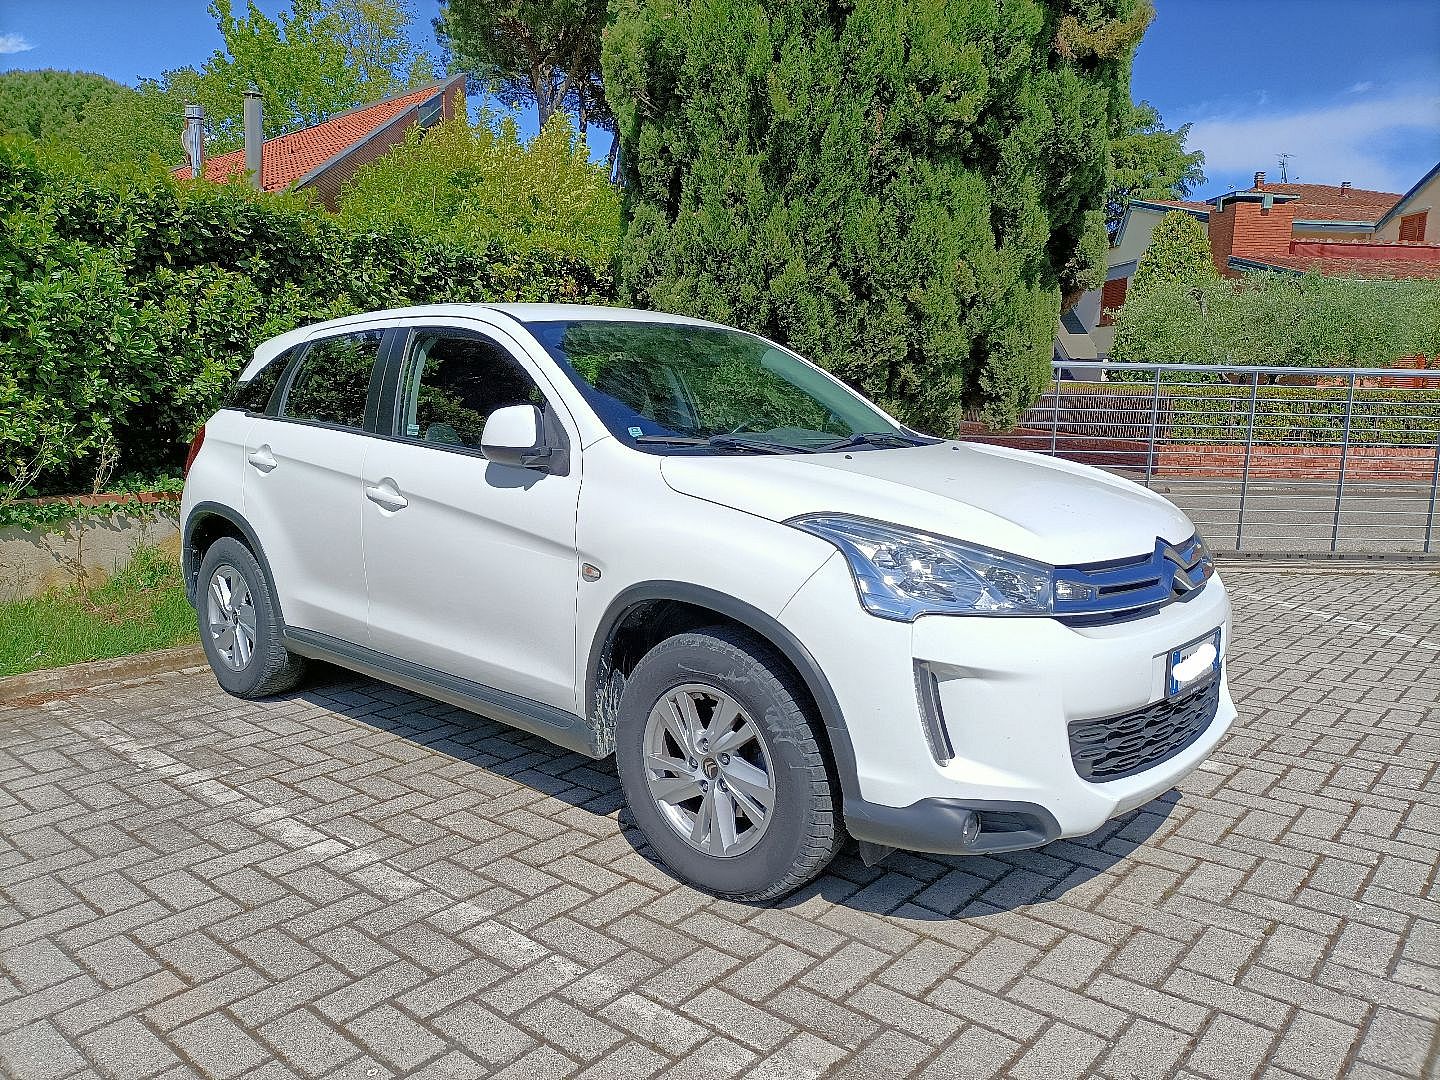 CITROEN - C4 Aircross 1.6 HDi 115 S&S 2WD Attraction